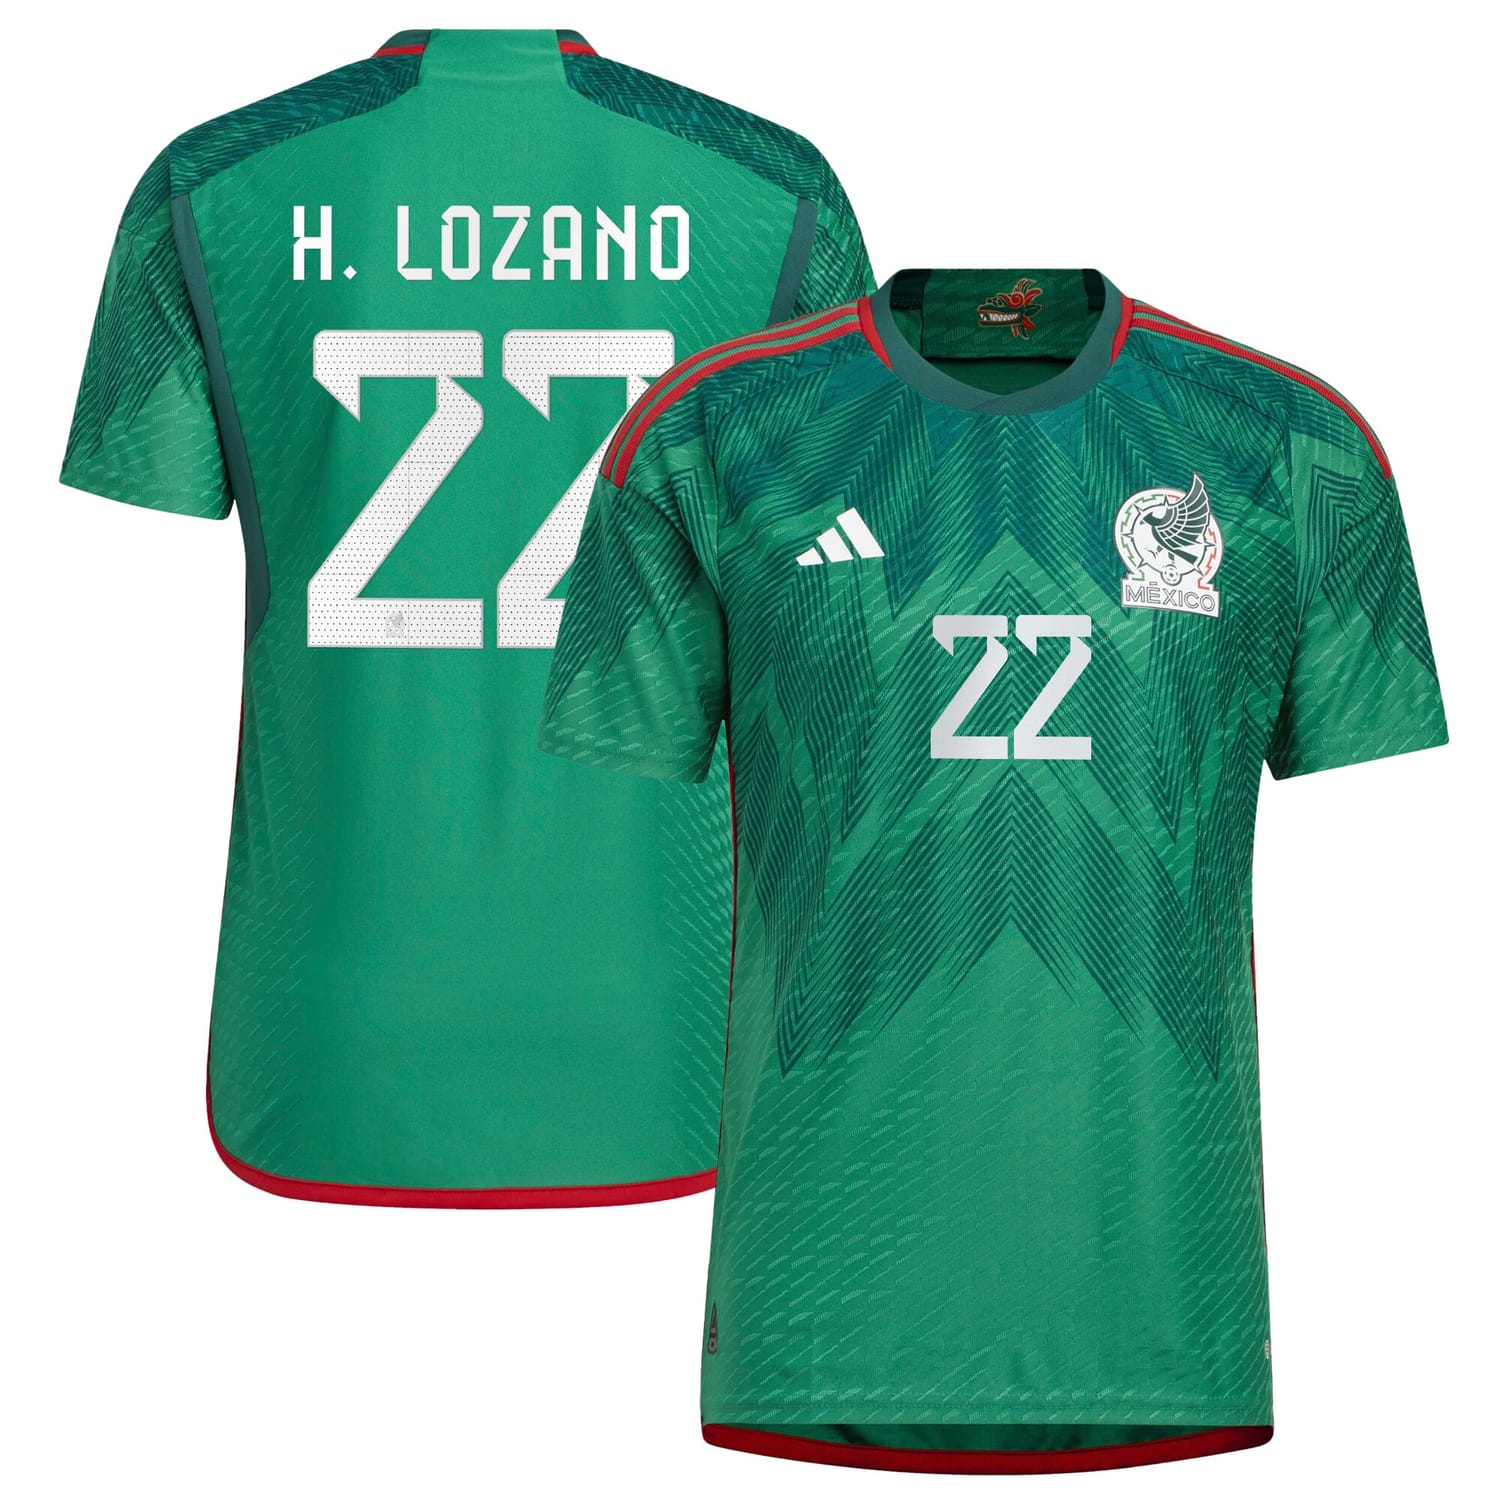 Mexico National Team Home Authentic Jersey Shirt Green 2022-23 player Hirving Lozano printing for Men